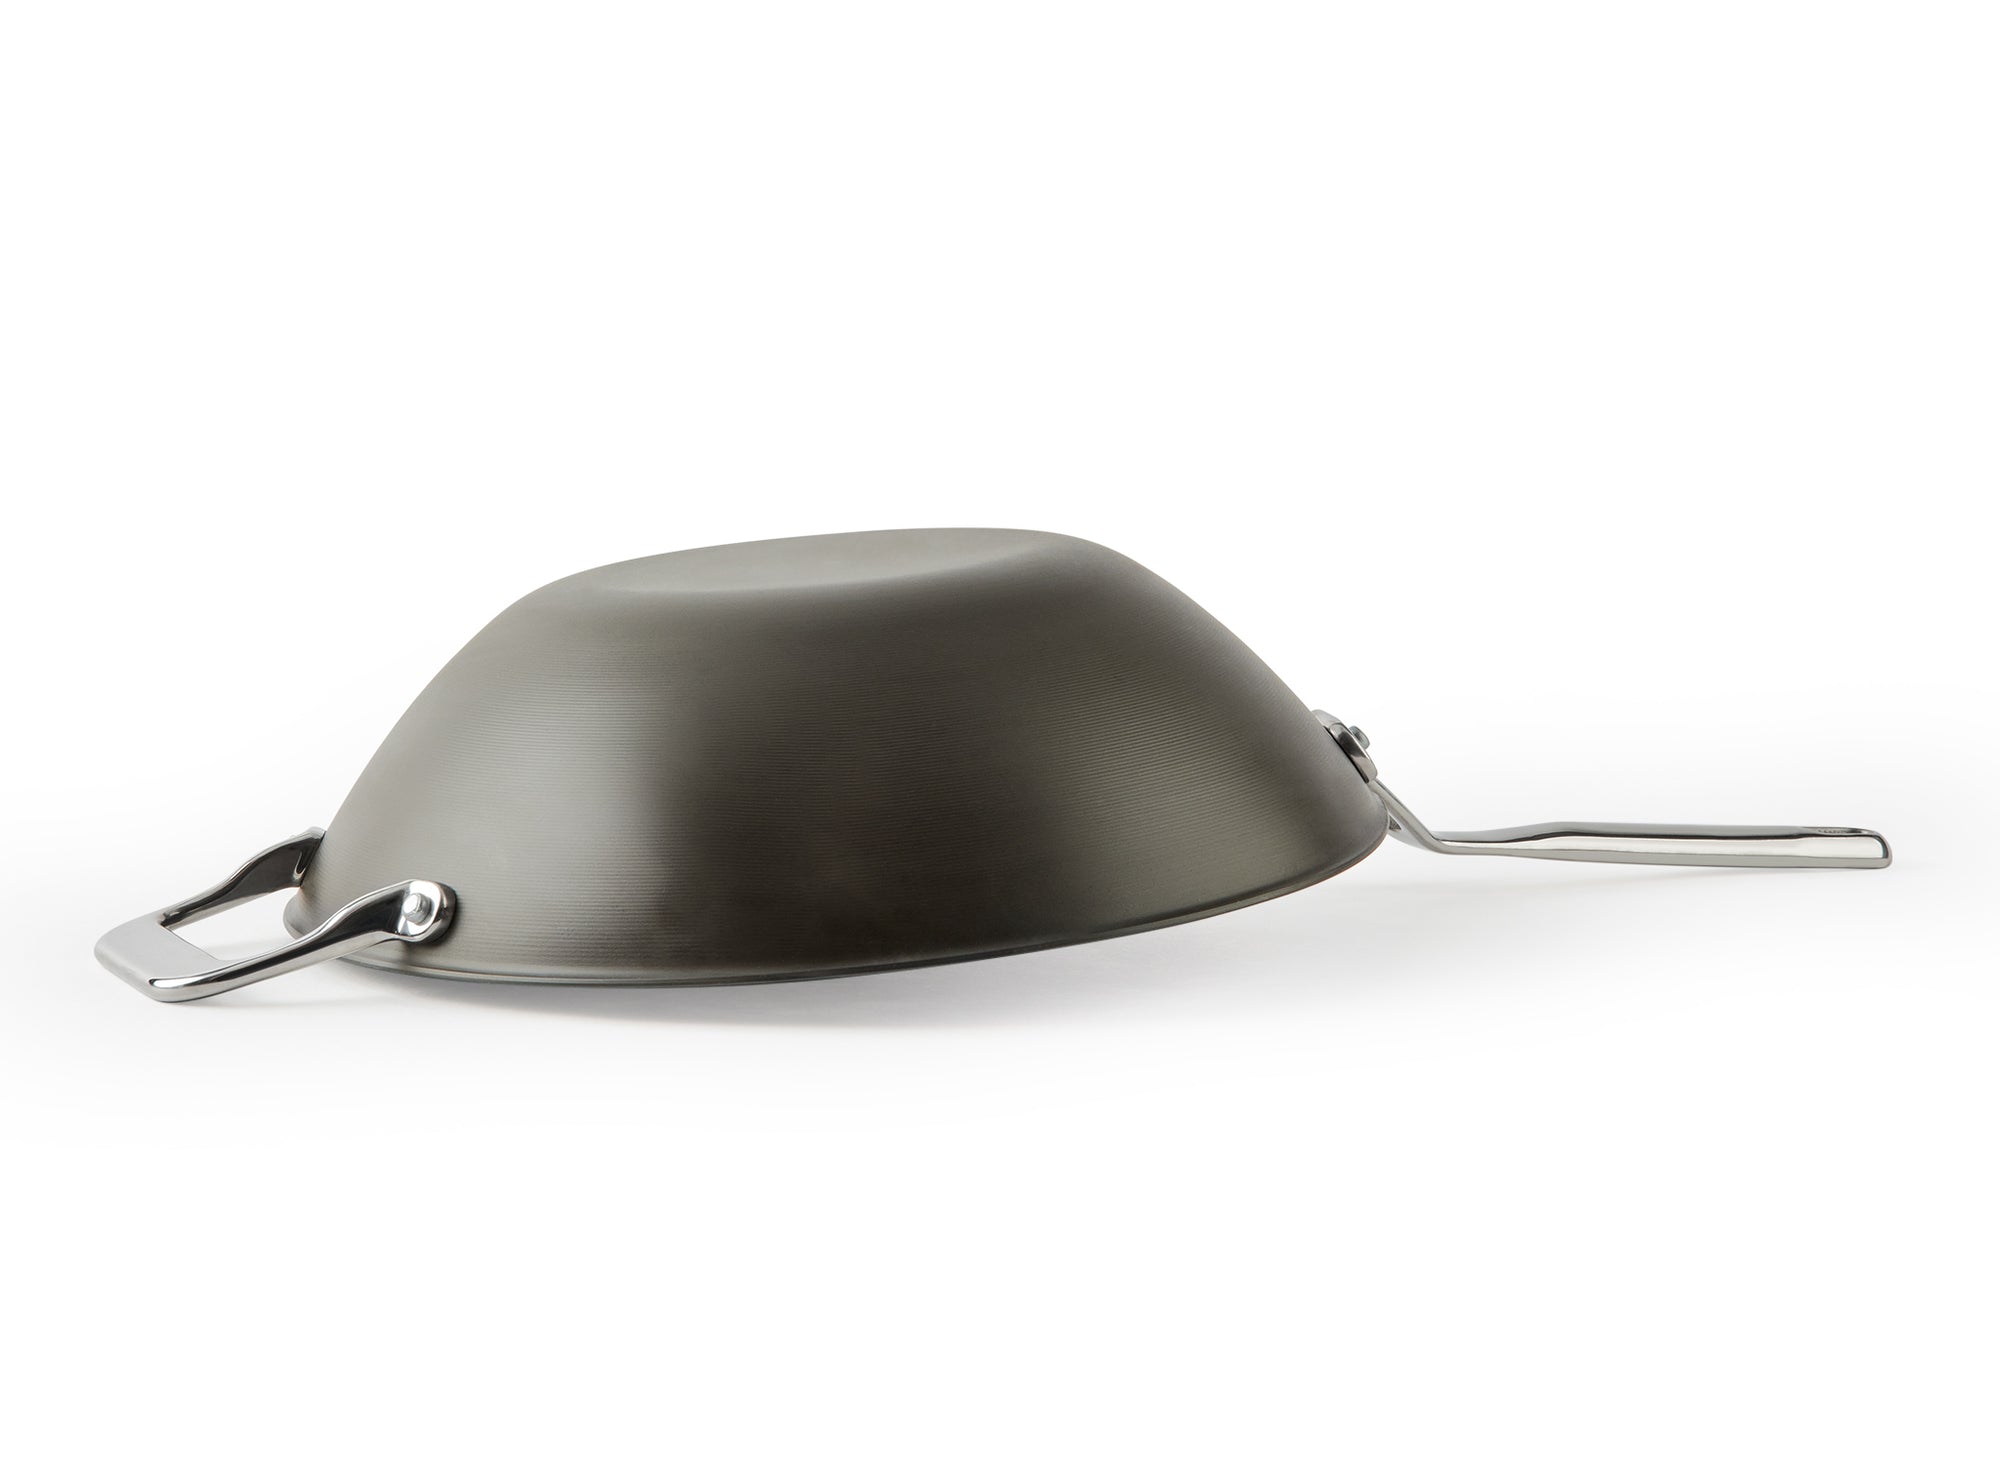 {{12-inch}} A side view of the Misen Carbon Steel Wok resting upside down on a white background. The wok’s flat base is clearly visible.